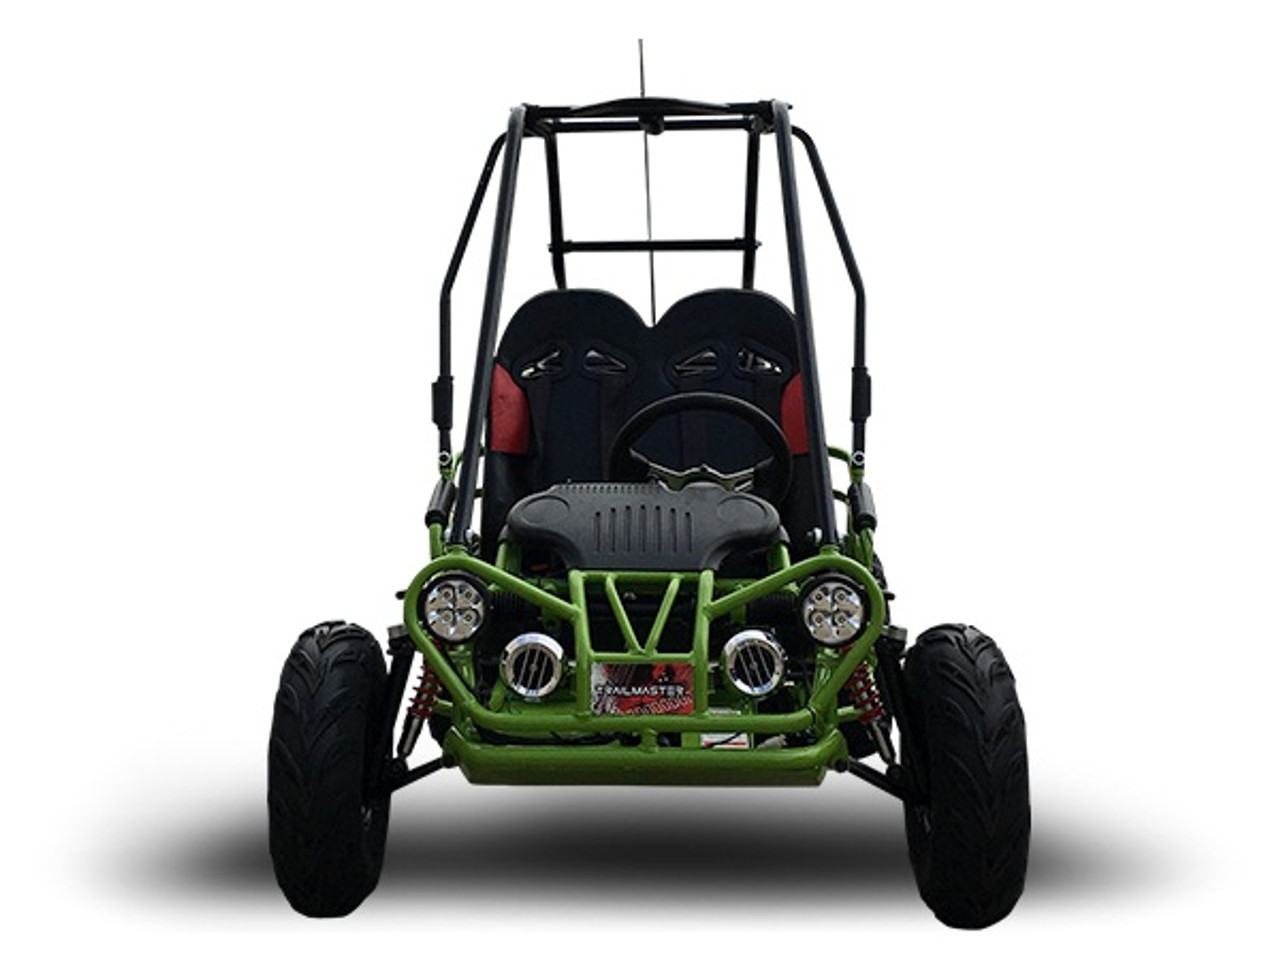 TrailMaster Mini XRX/R+ (Plus) Upgraded Go Kart with Bigger Tires, Frame, Wider Seat - FRONT GREEN